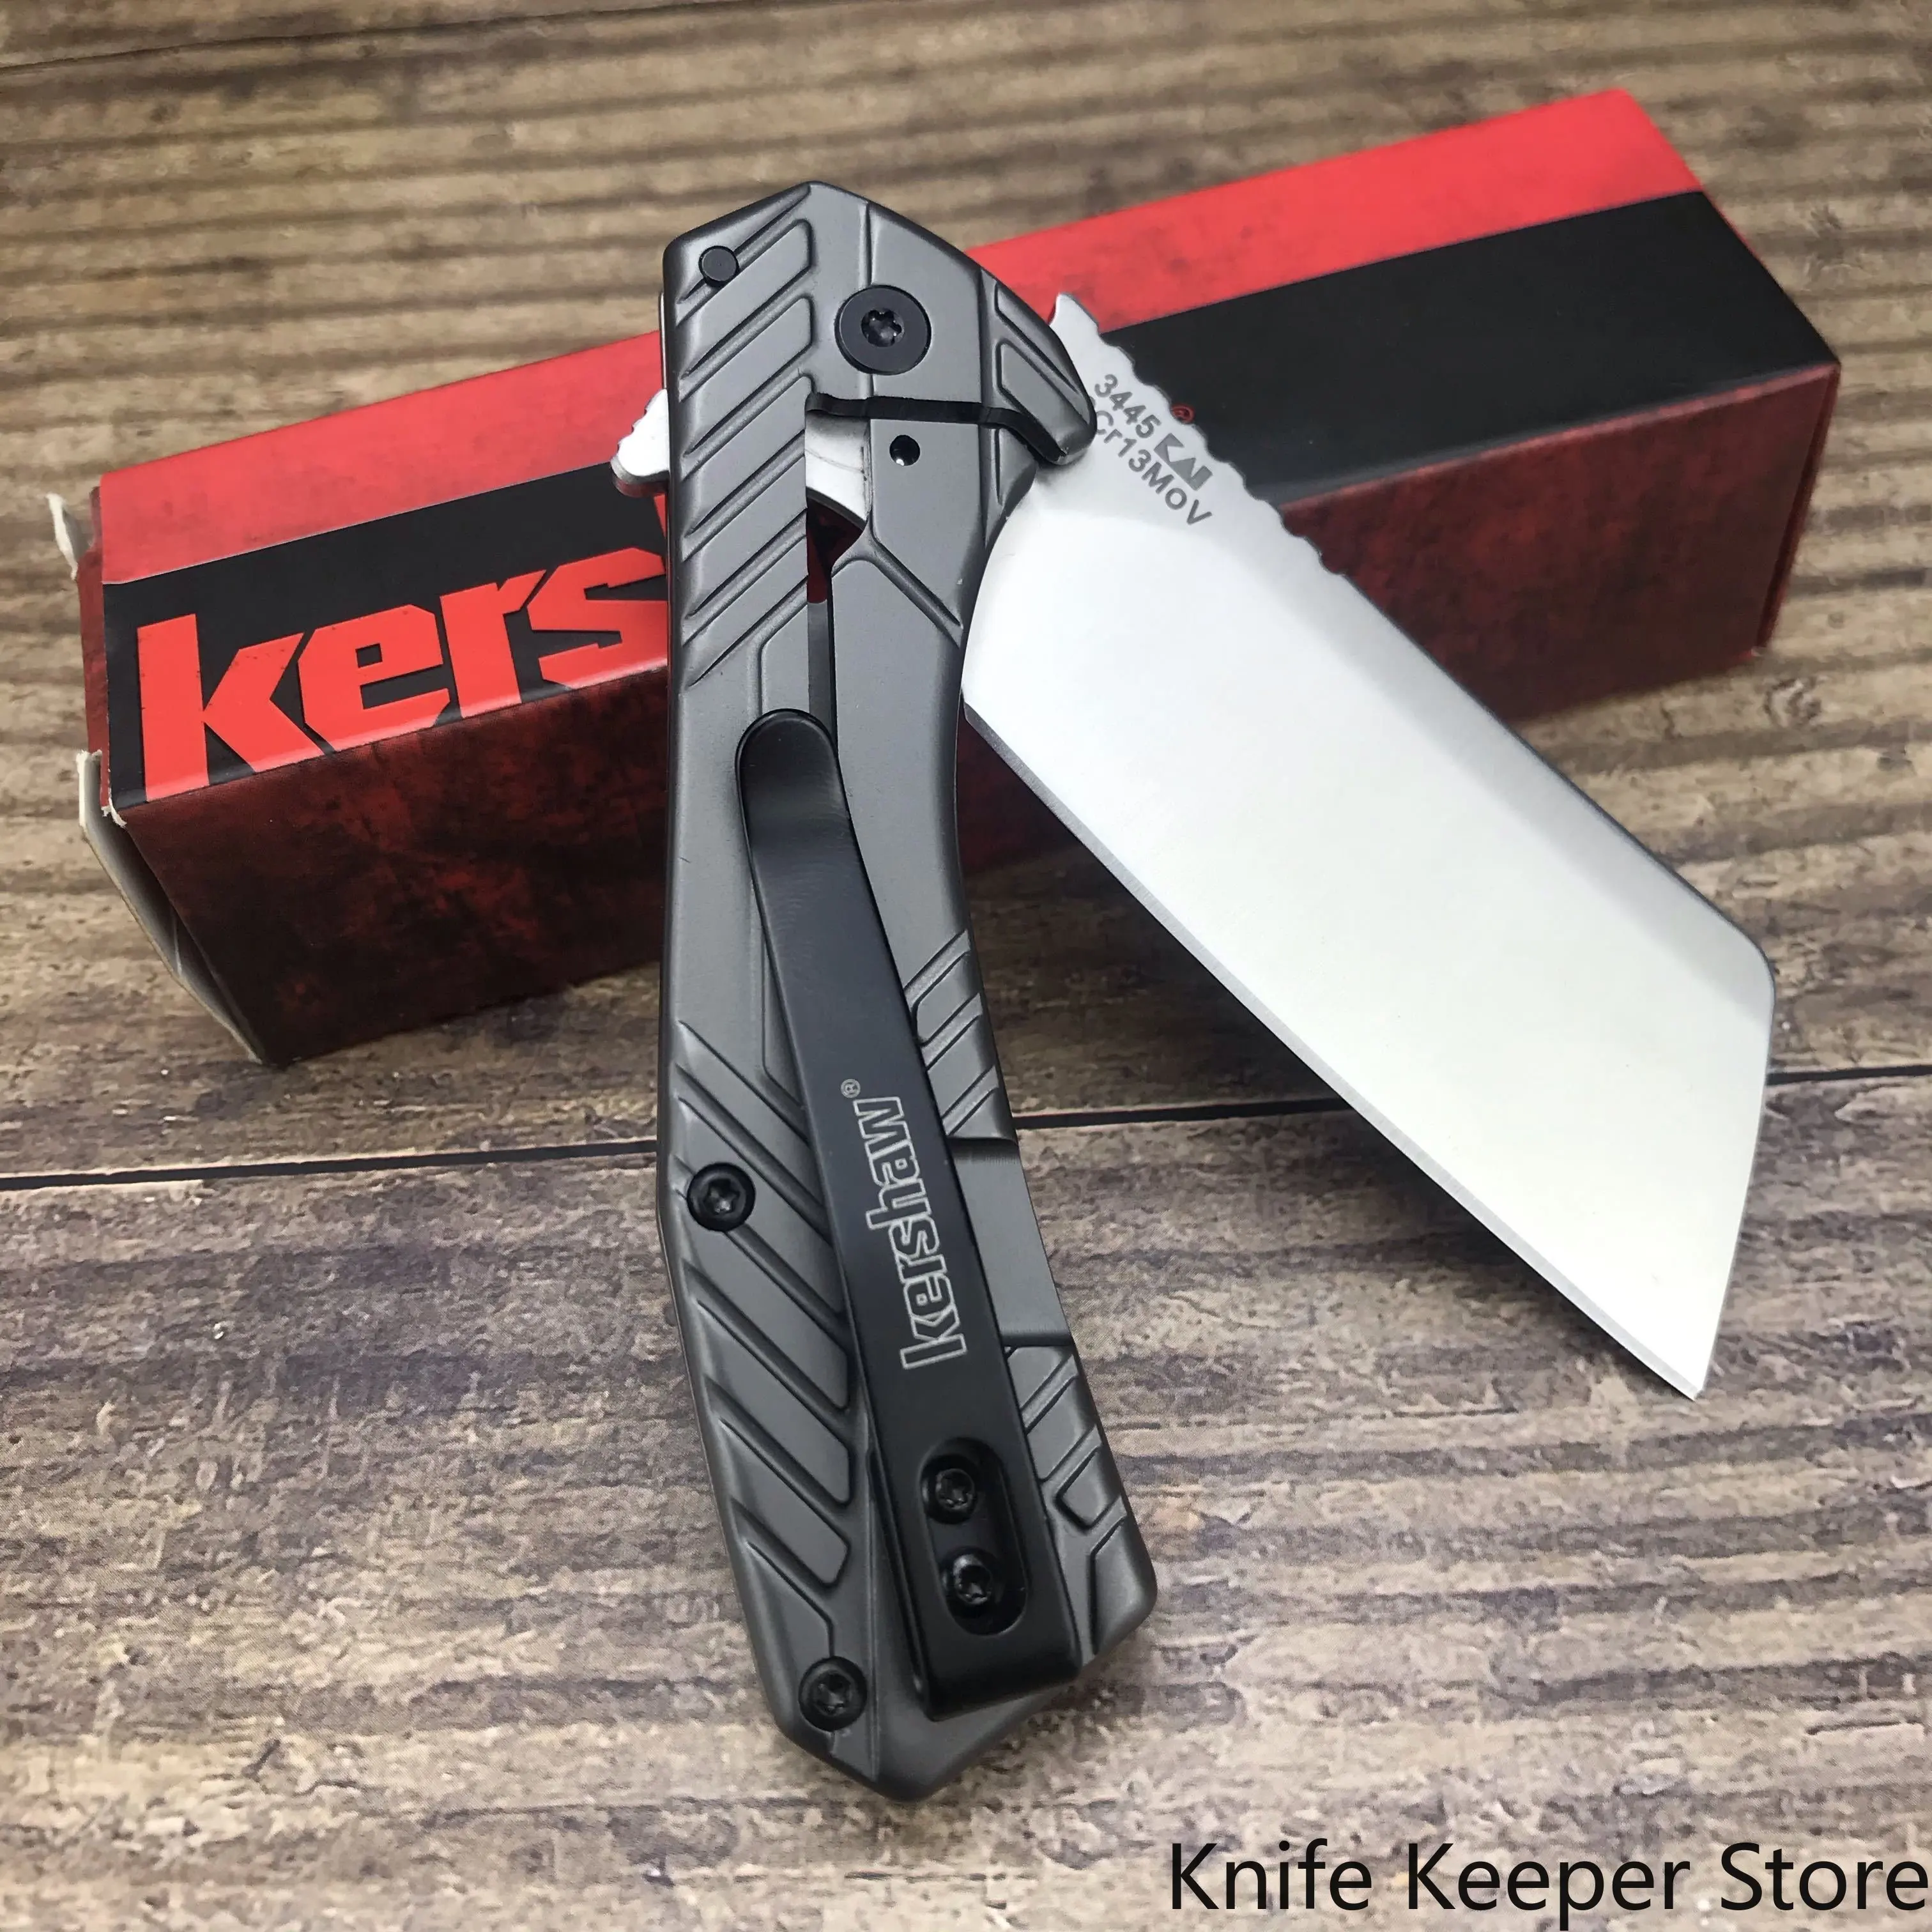 Kershaw 3445 Folding Blade Knife Stainless Steel Military Outdoor Camping Hunting Survival Pocket EDC Tool Tactical Multi Knives